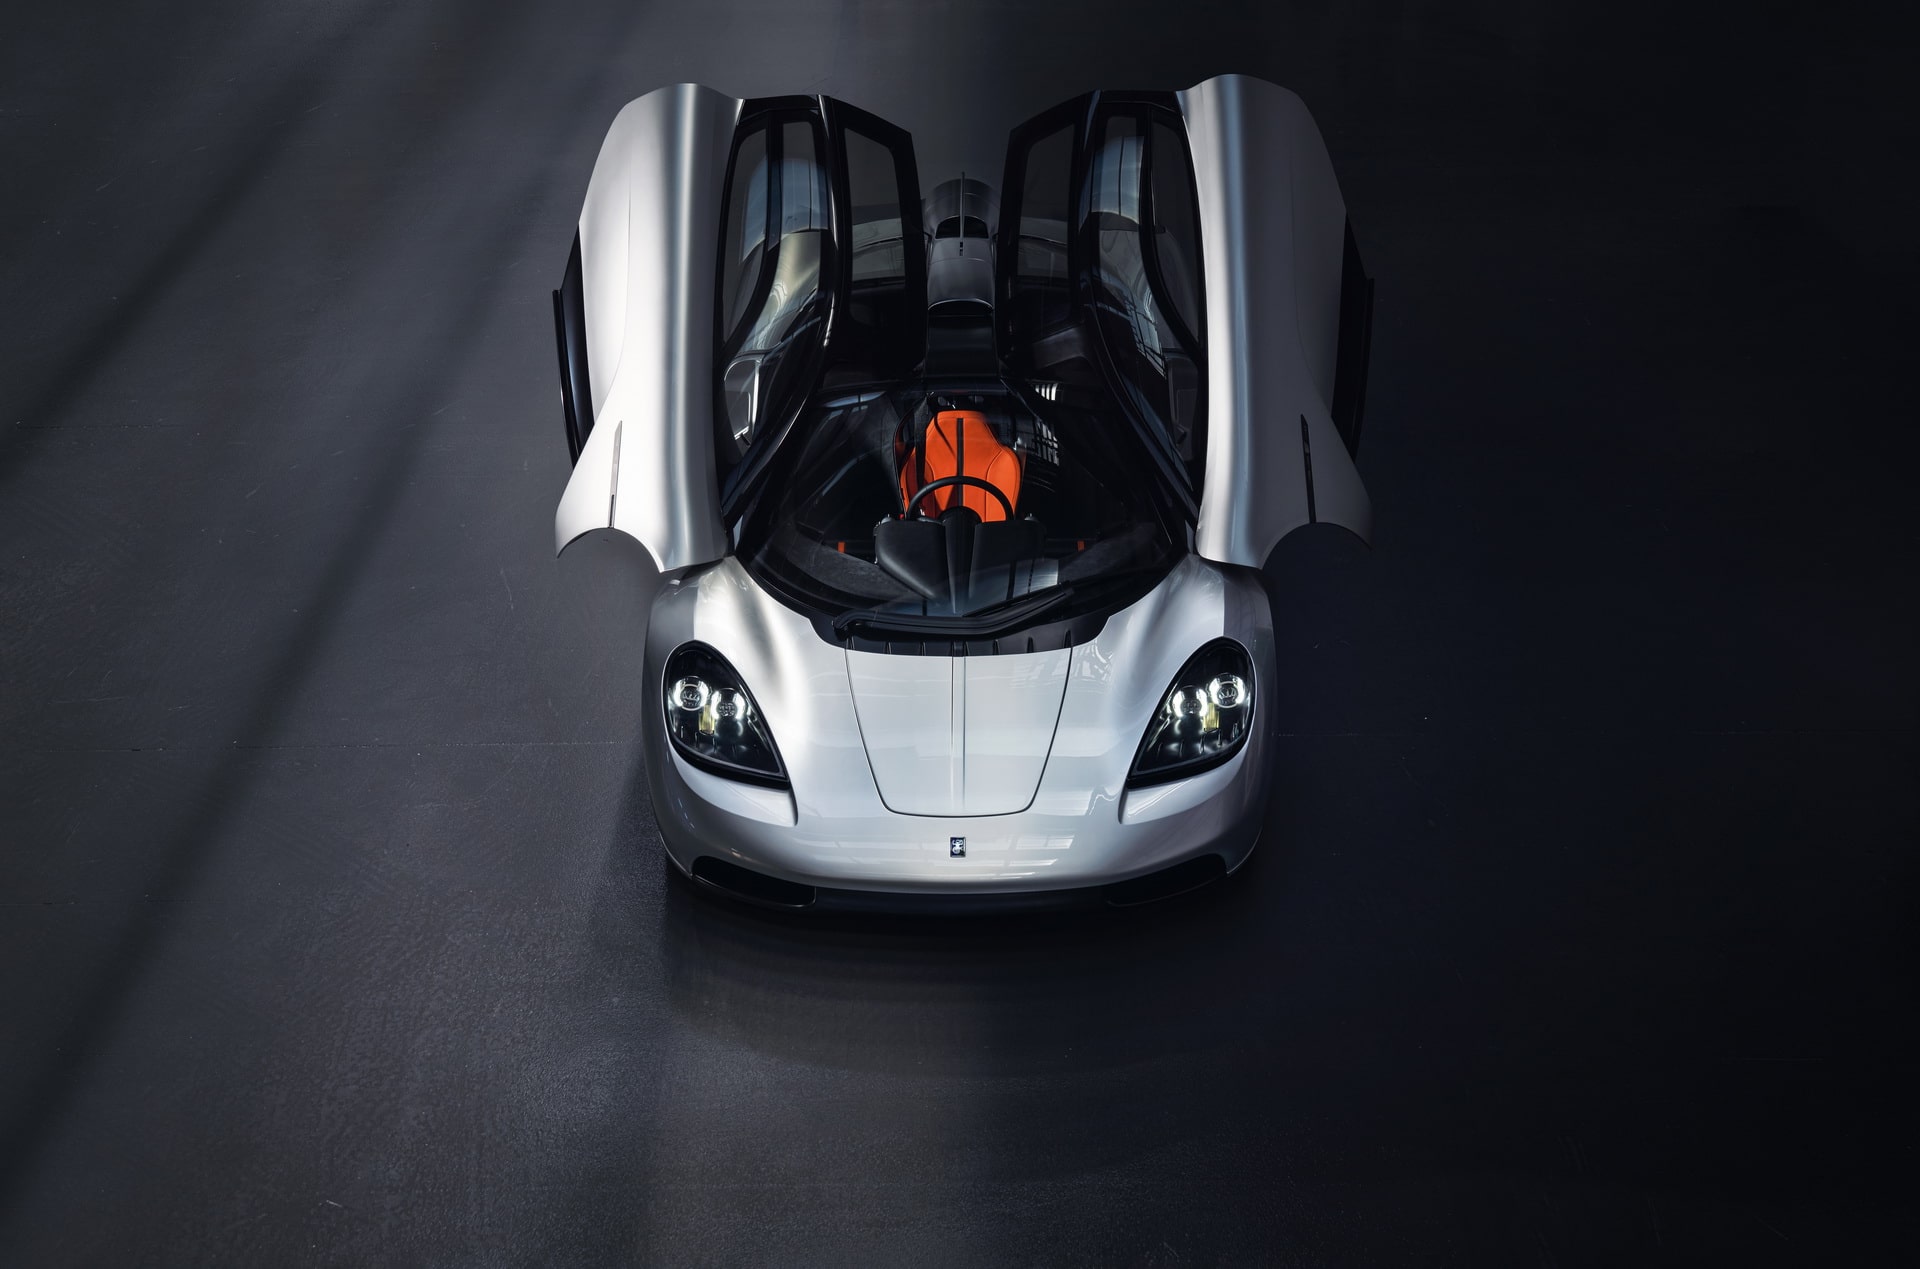 The Gordon Murray Automotive T.33 Spider Is A Supercar For Perfectionists